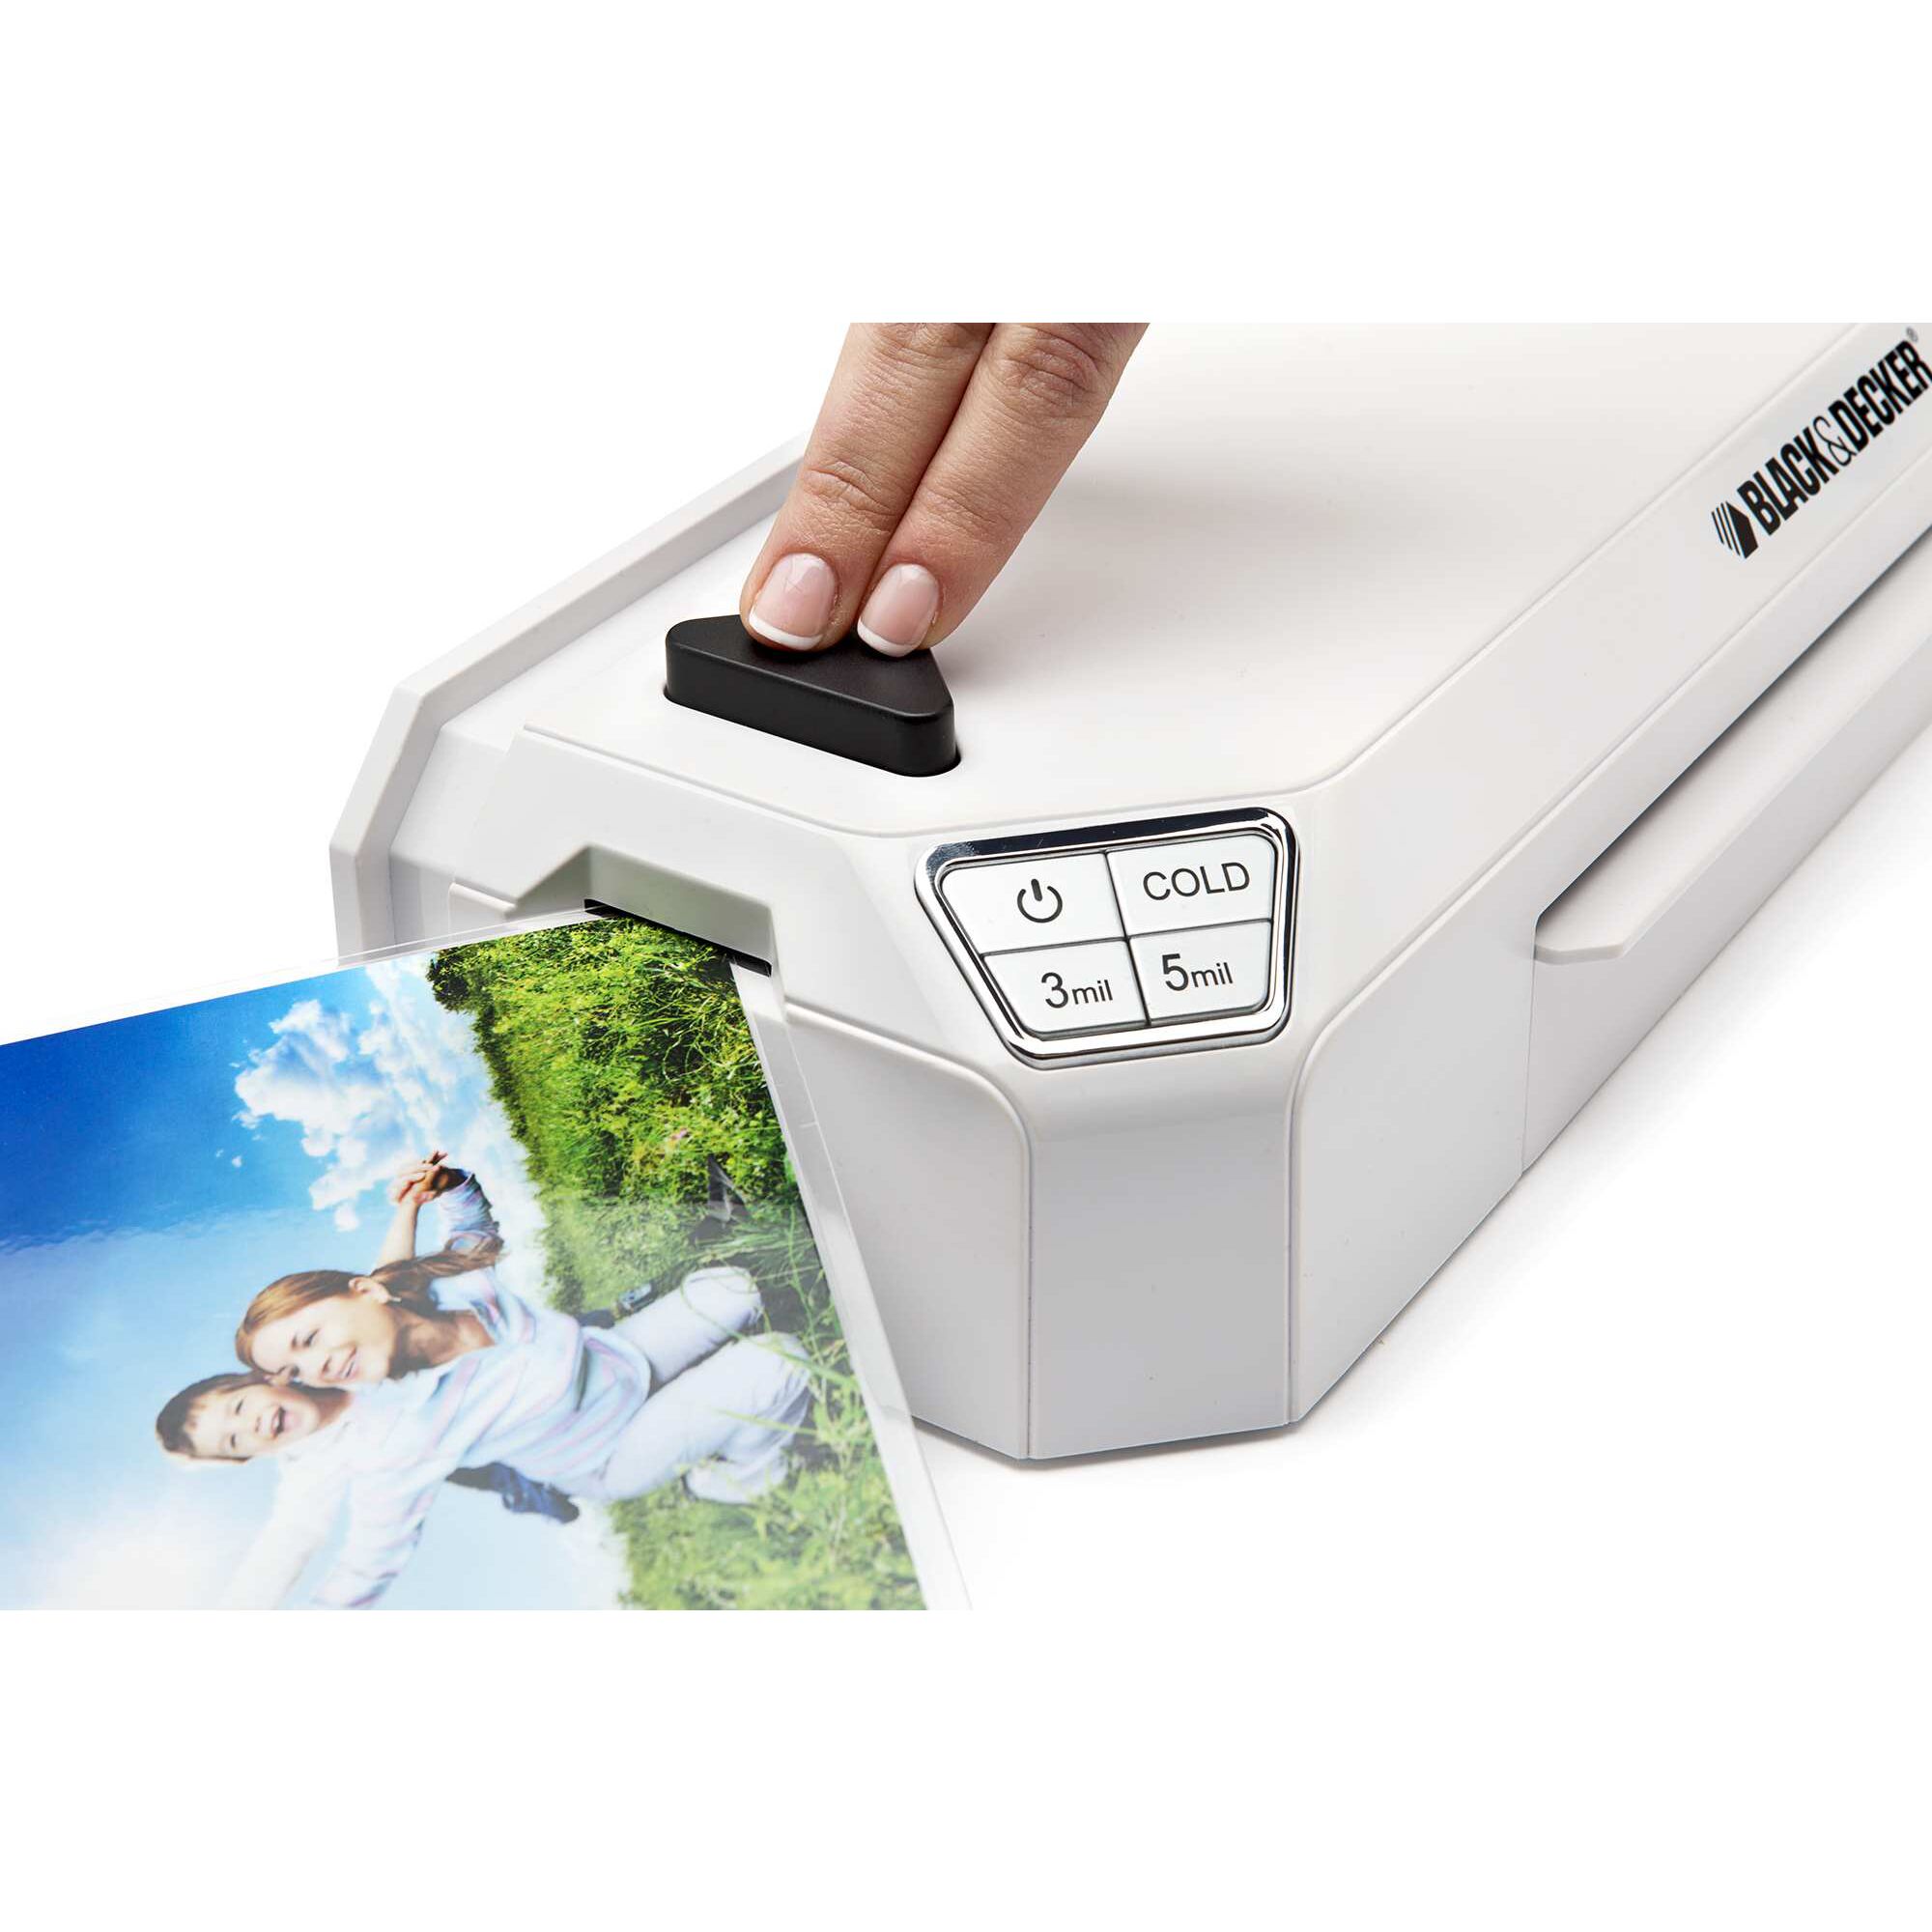 Flash 9 and 5 tenths inch Thermal Laminator being used to laminate photograph.